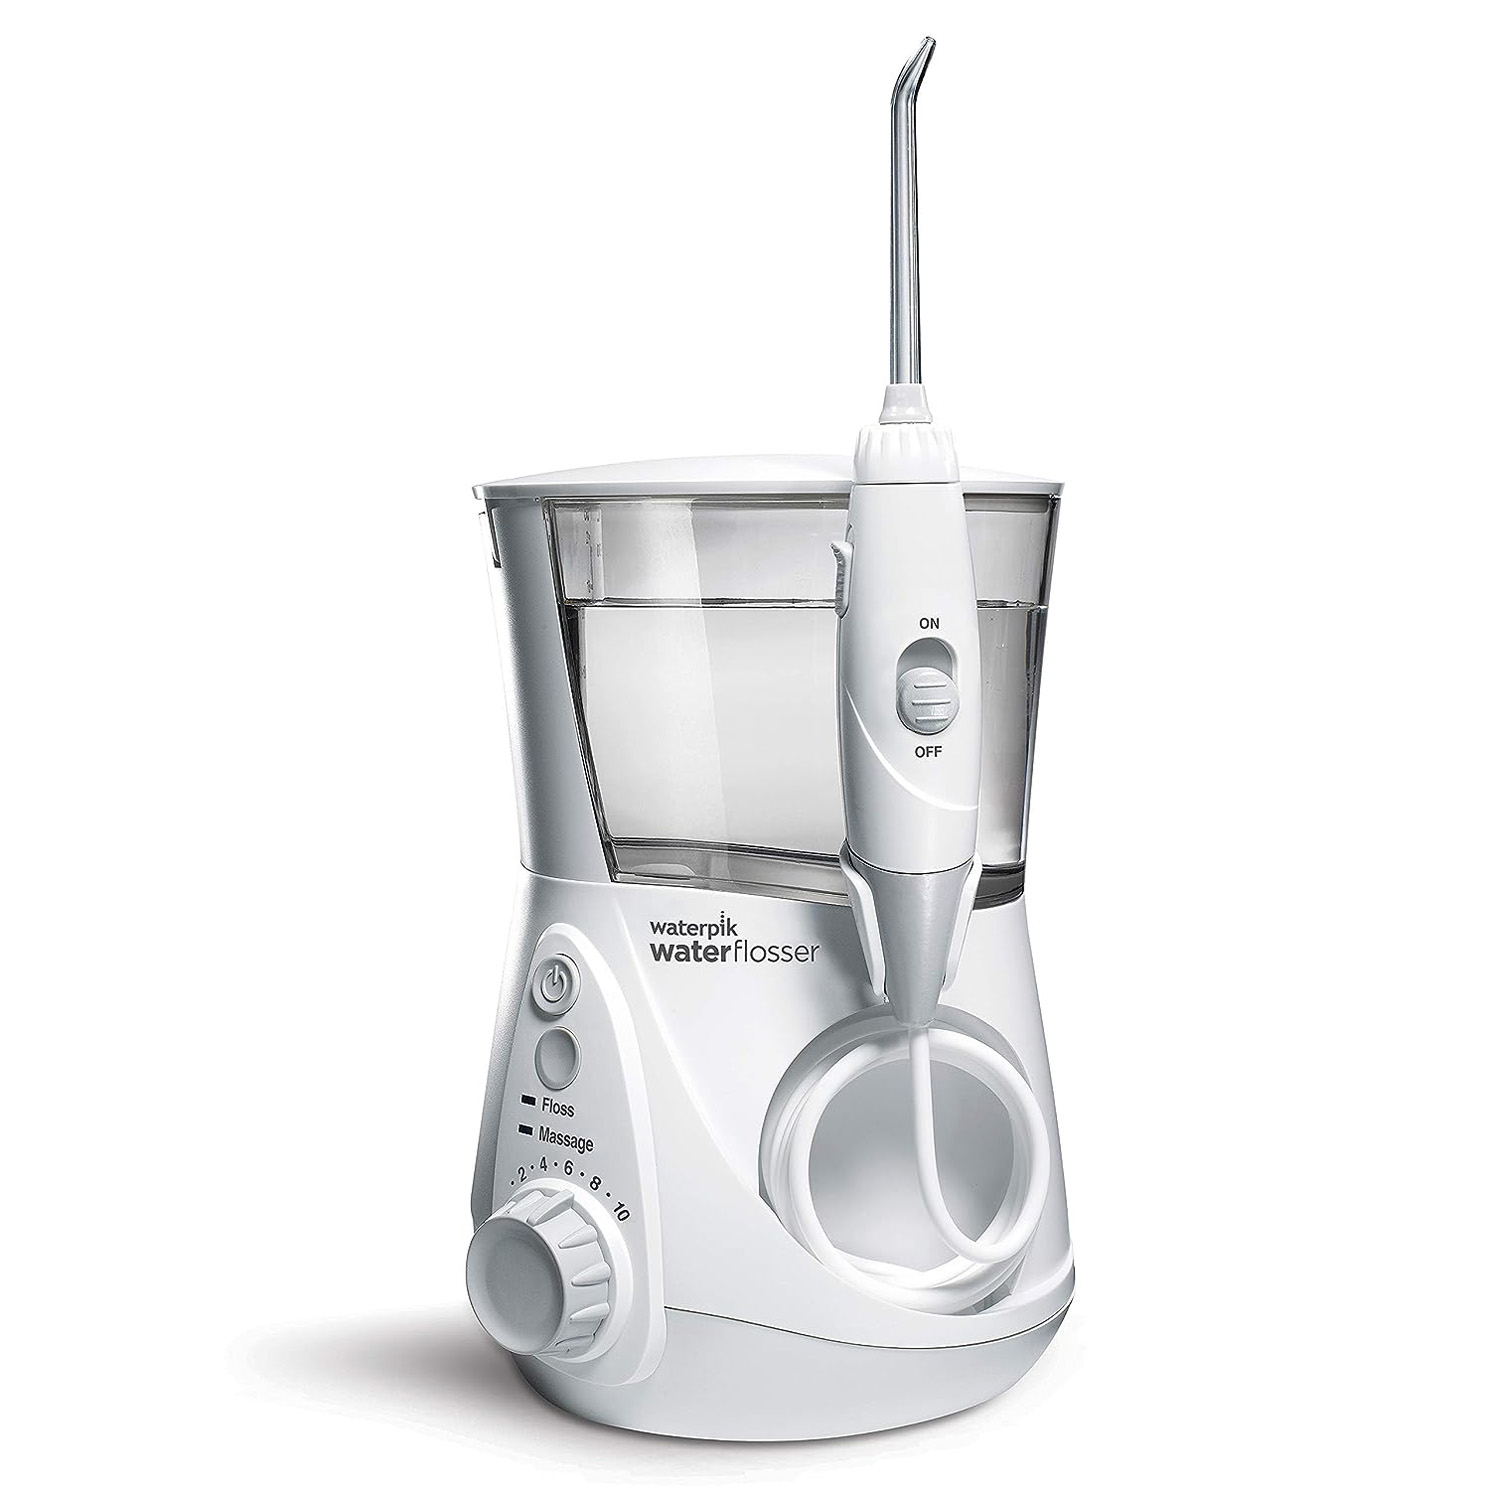 Waterpik Aquarius Water Flosser Professional For Teeth, Gums, Braces, Dental Care, Electric Power With 10 Settings, 7 Tips For Multiple Users And Needs, ADA Accepted